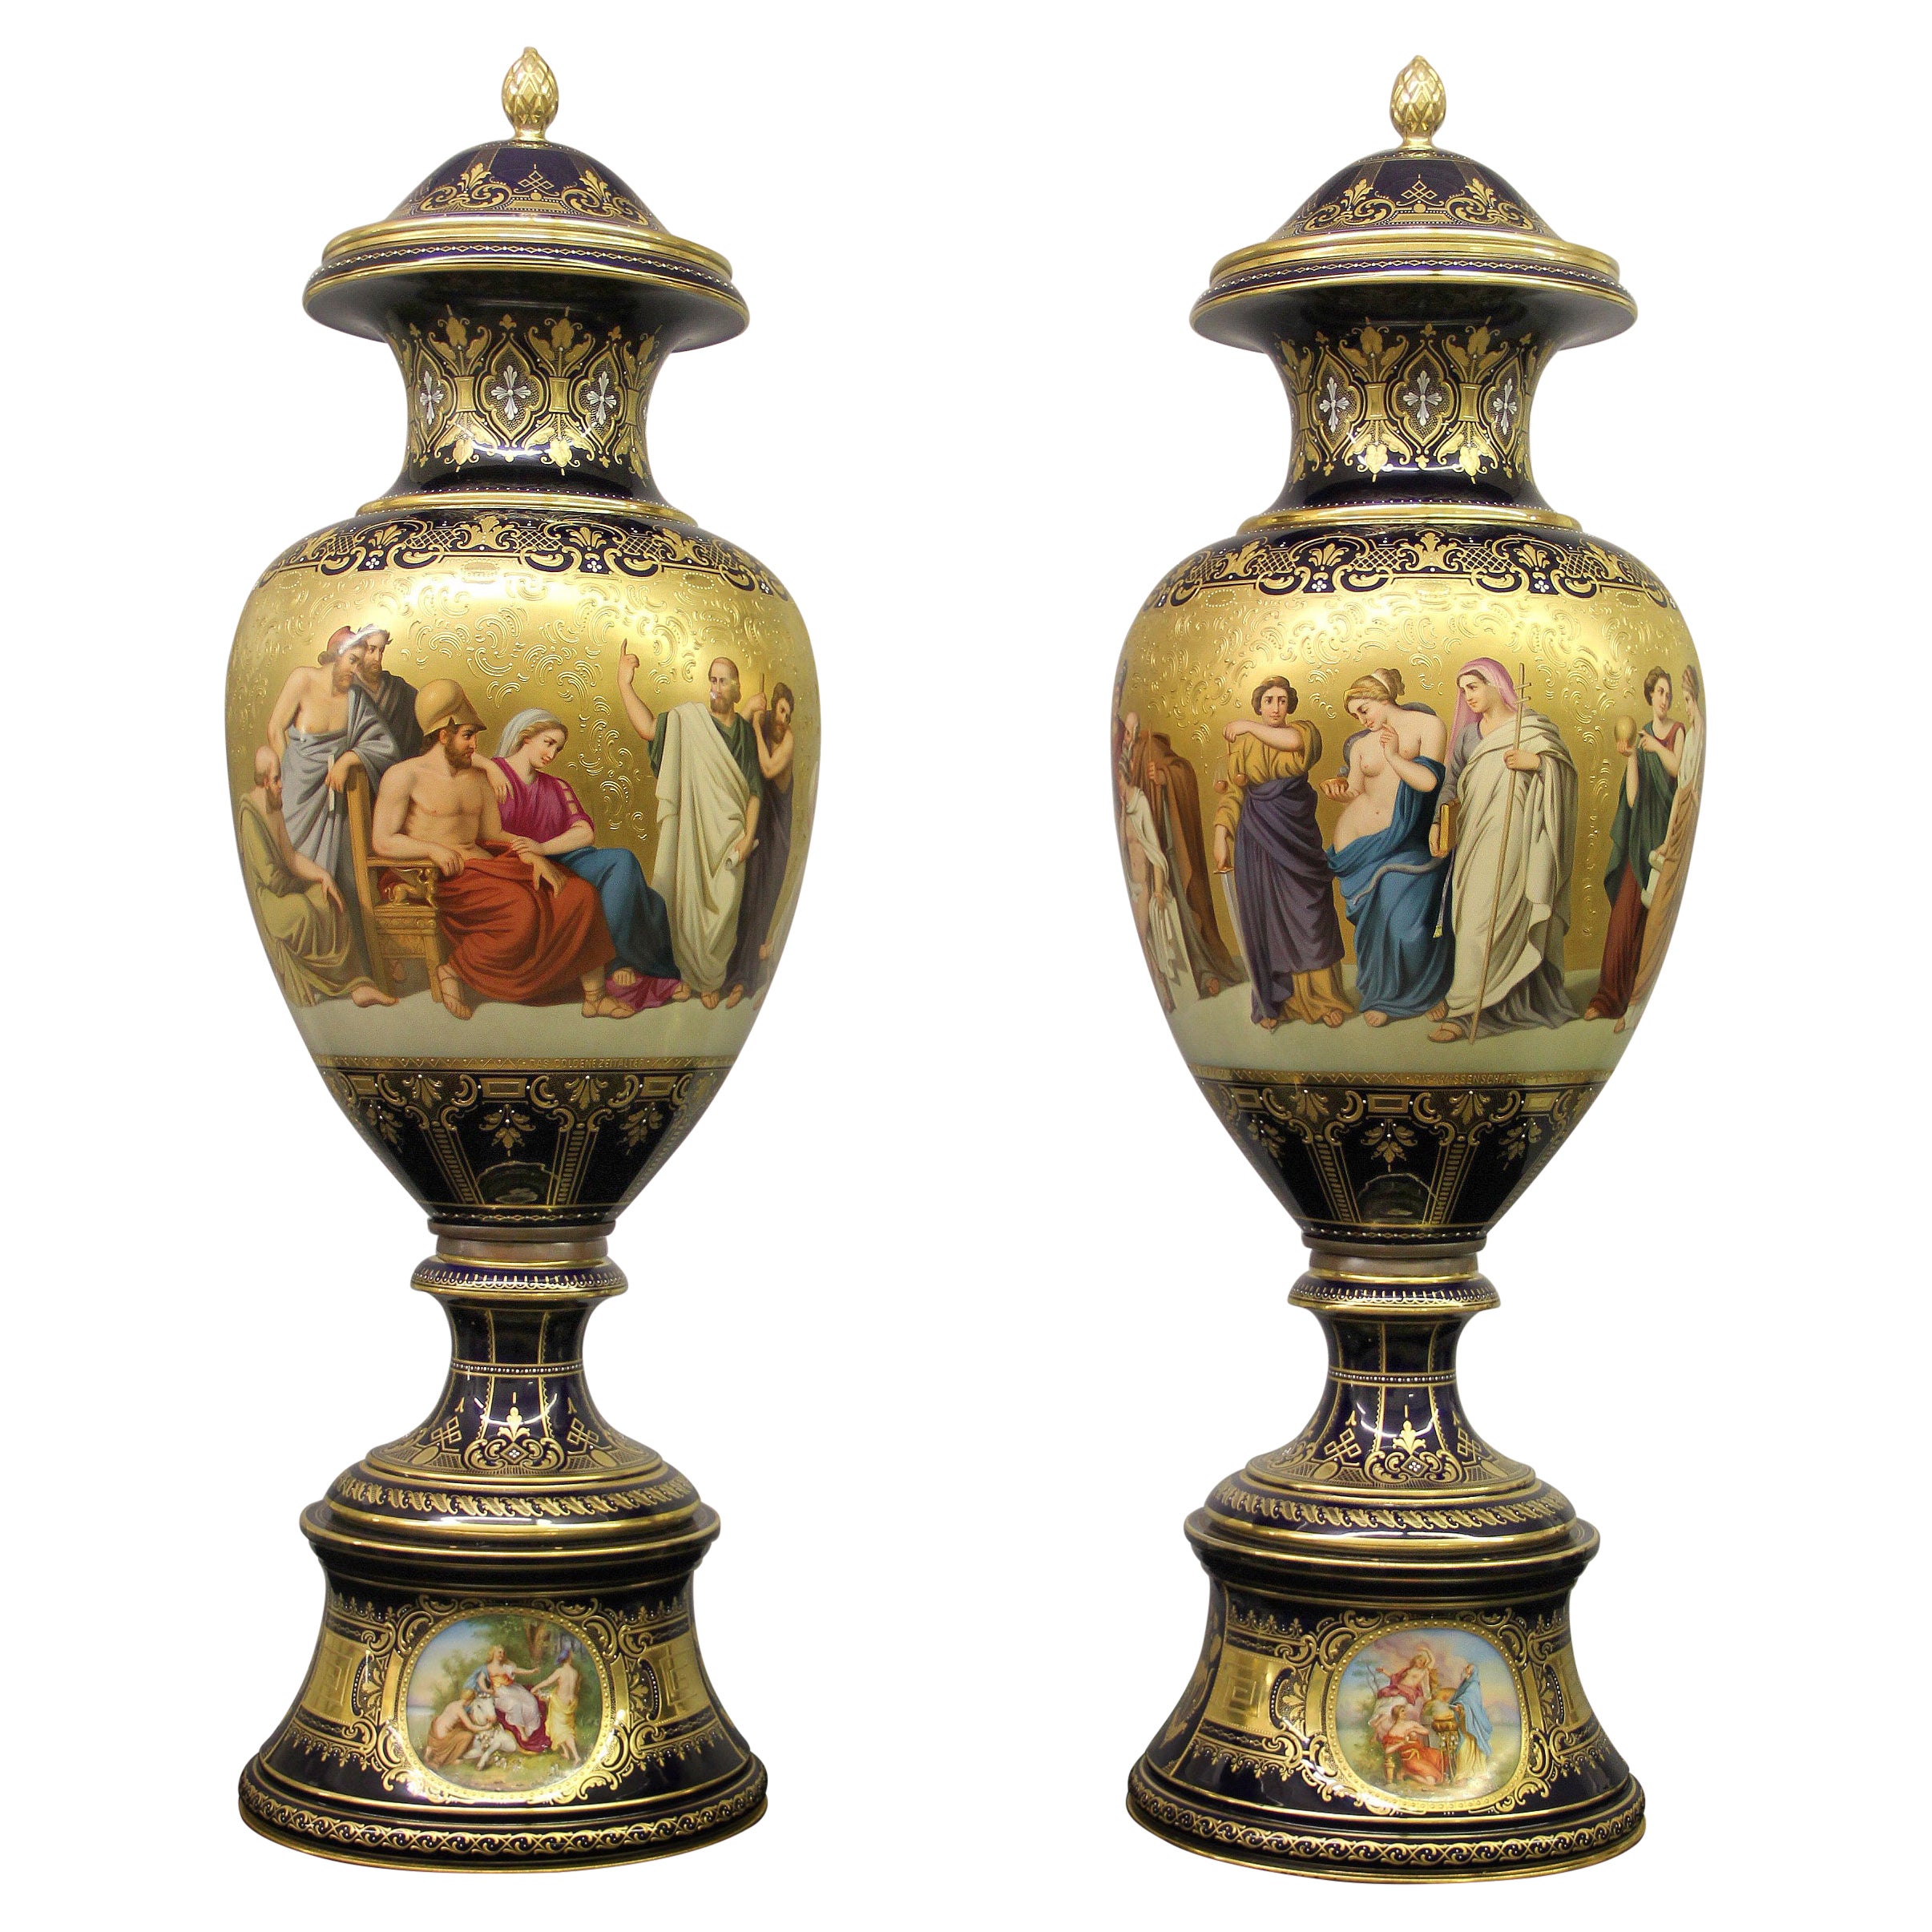 Exceptionally Pair of Late 19th Century Exhibition Royal Vienna Porcelain Vases